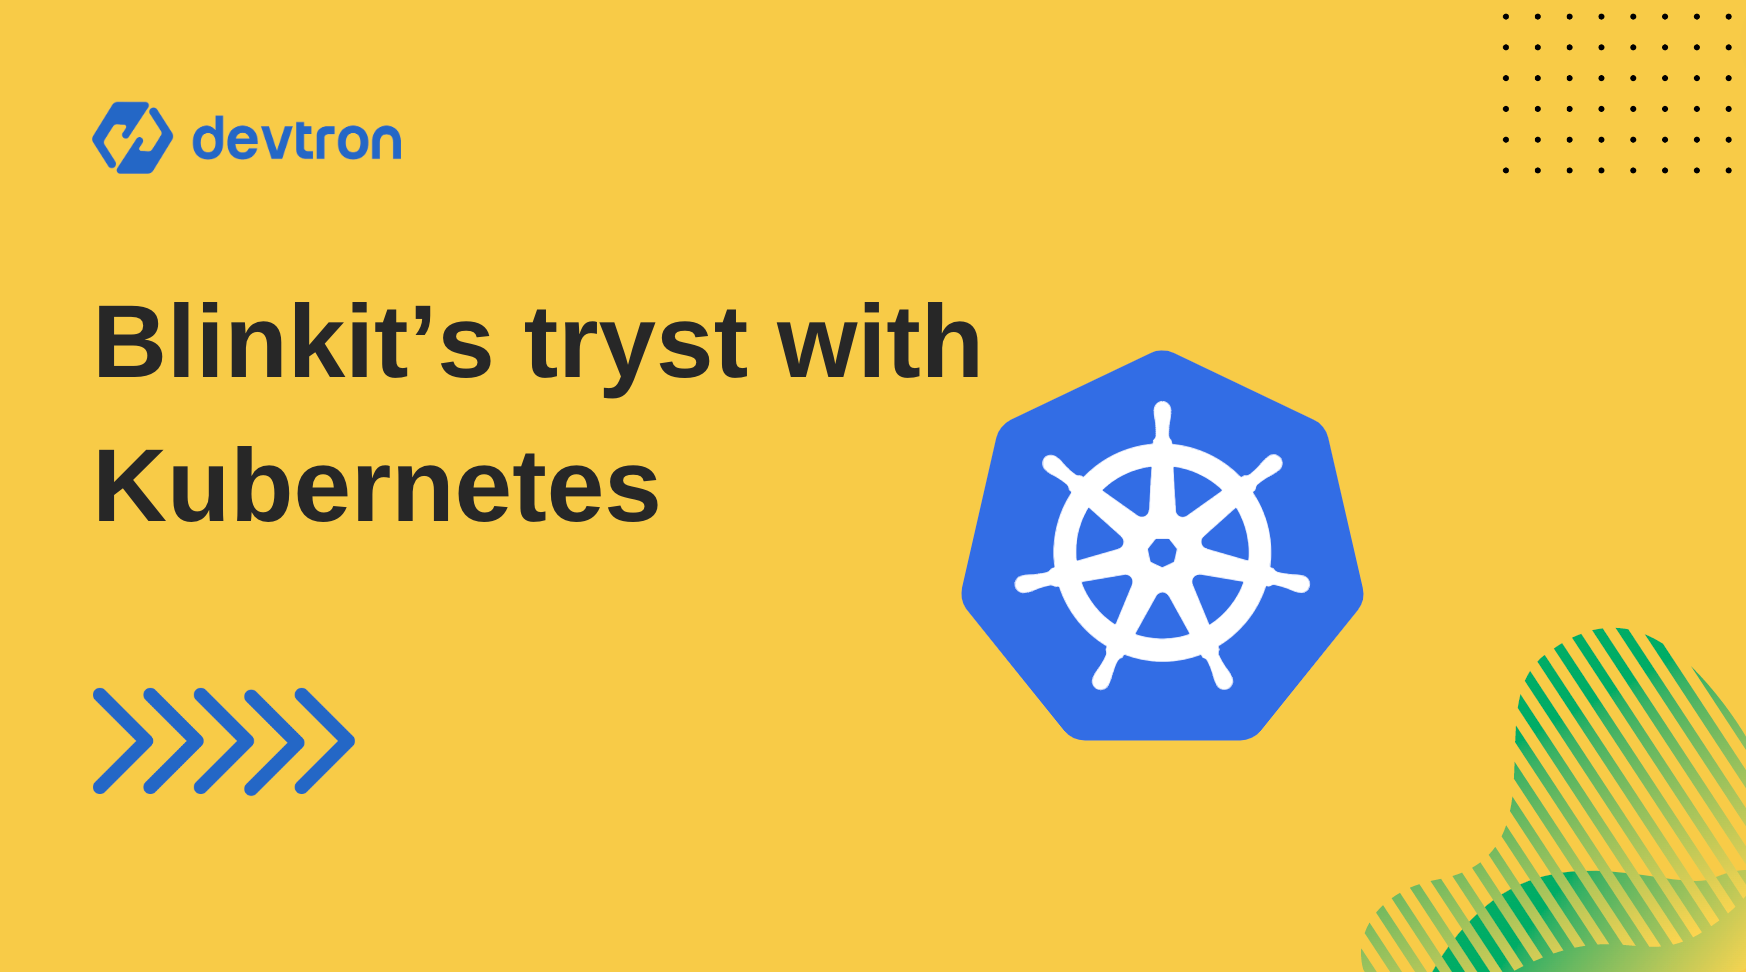 Blinkit’s tryst with Kubernetes